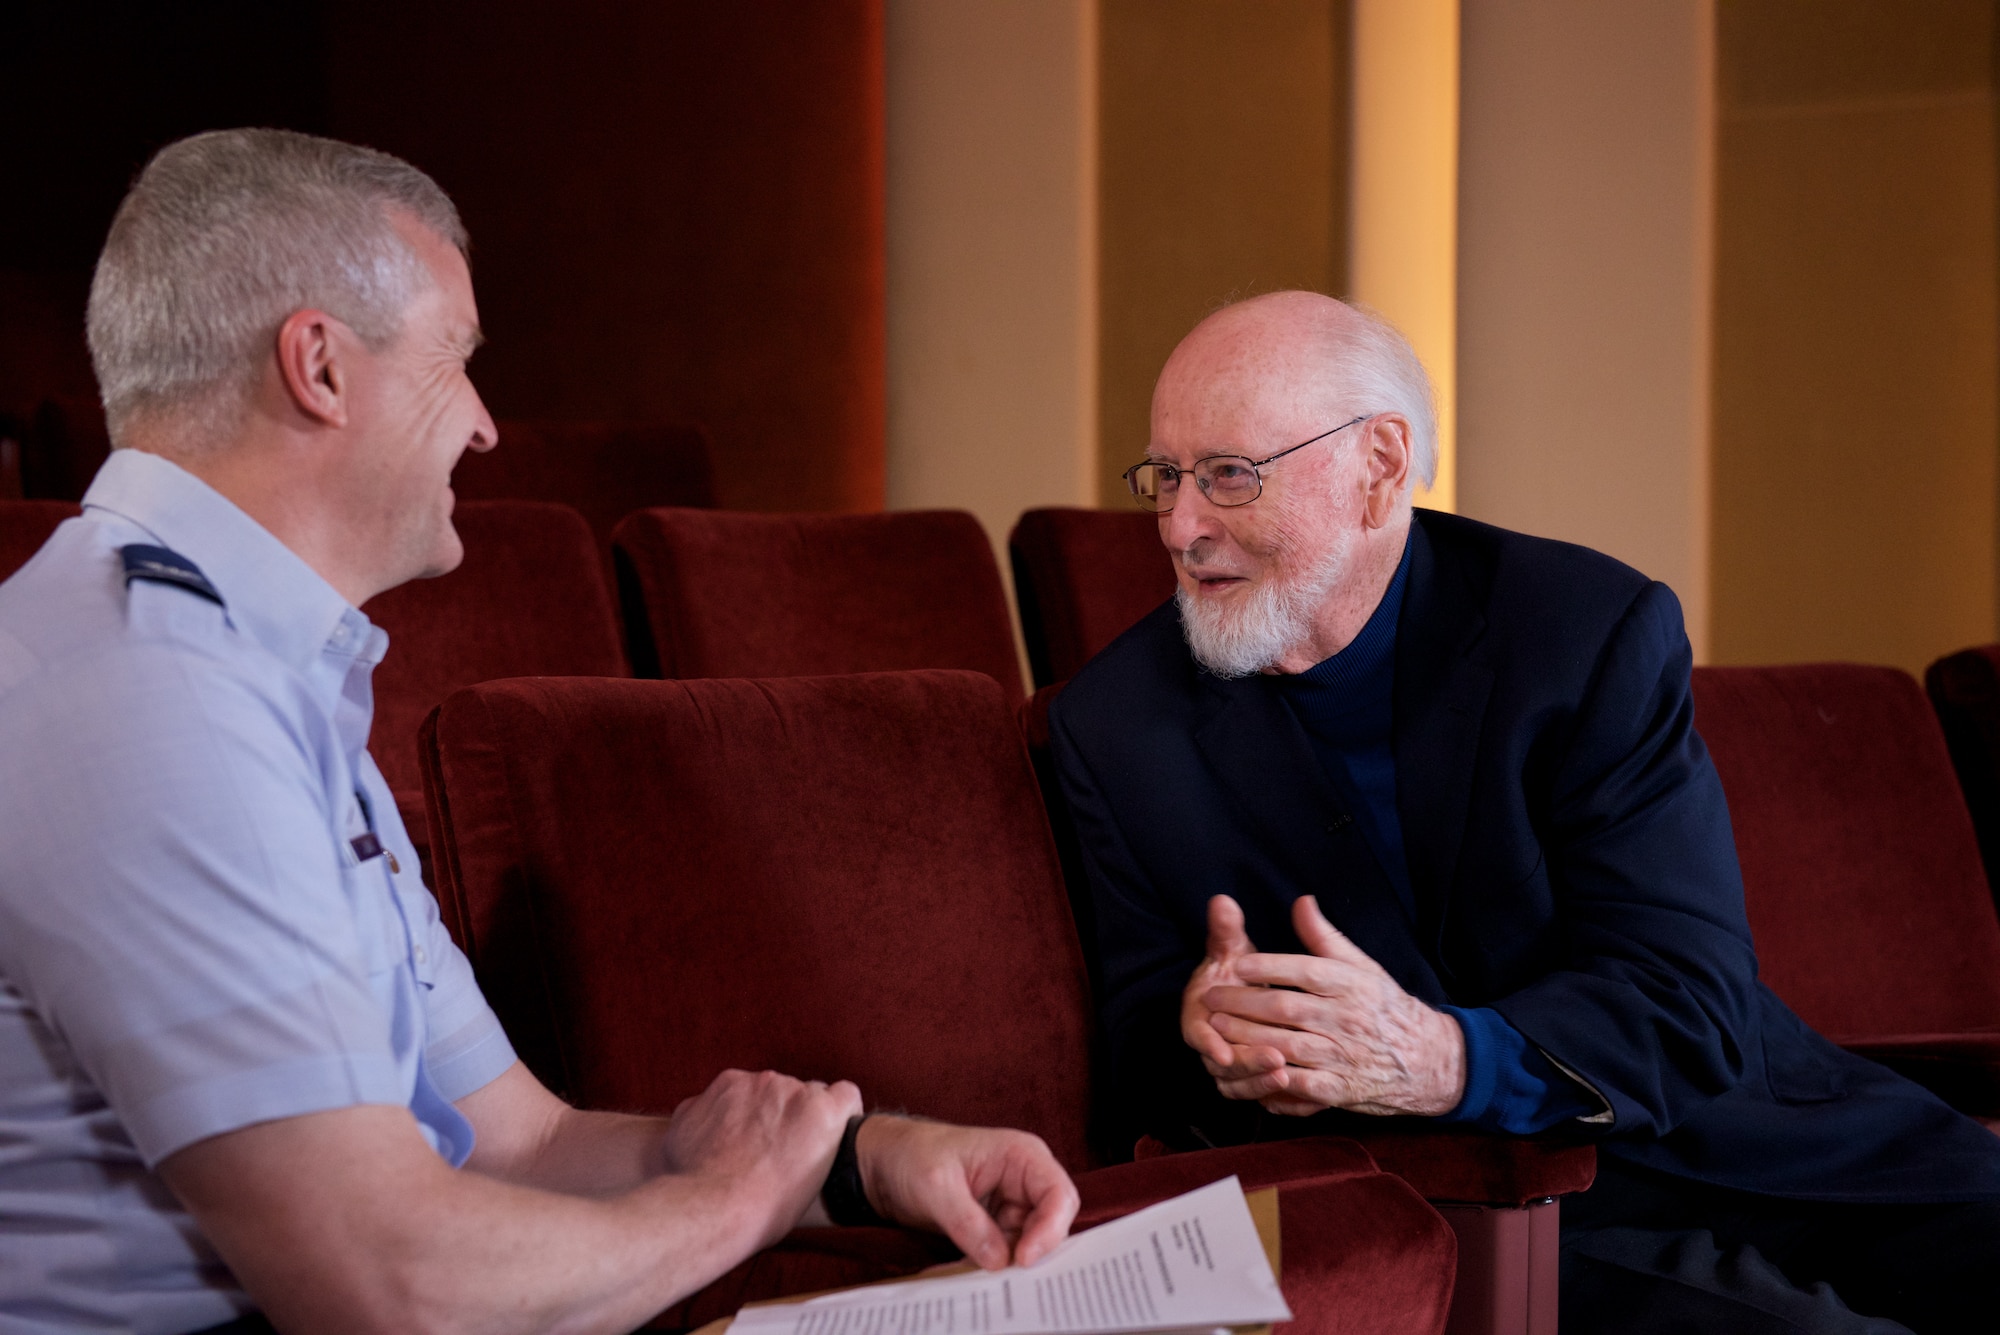 Legendary conductor and composer John Williams talks about his time in the U. S. Air Force with Col. Larry Lang, commander of the U.S. Air Force Band. Williams served as a pianist and brass player, arranging and writing as a secondary duty, though extensively. (U.S. Air Force Photo/CMSgt Bob Kamholz)